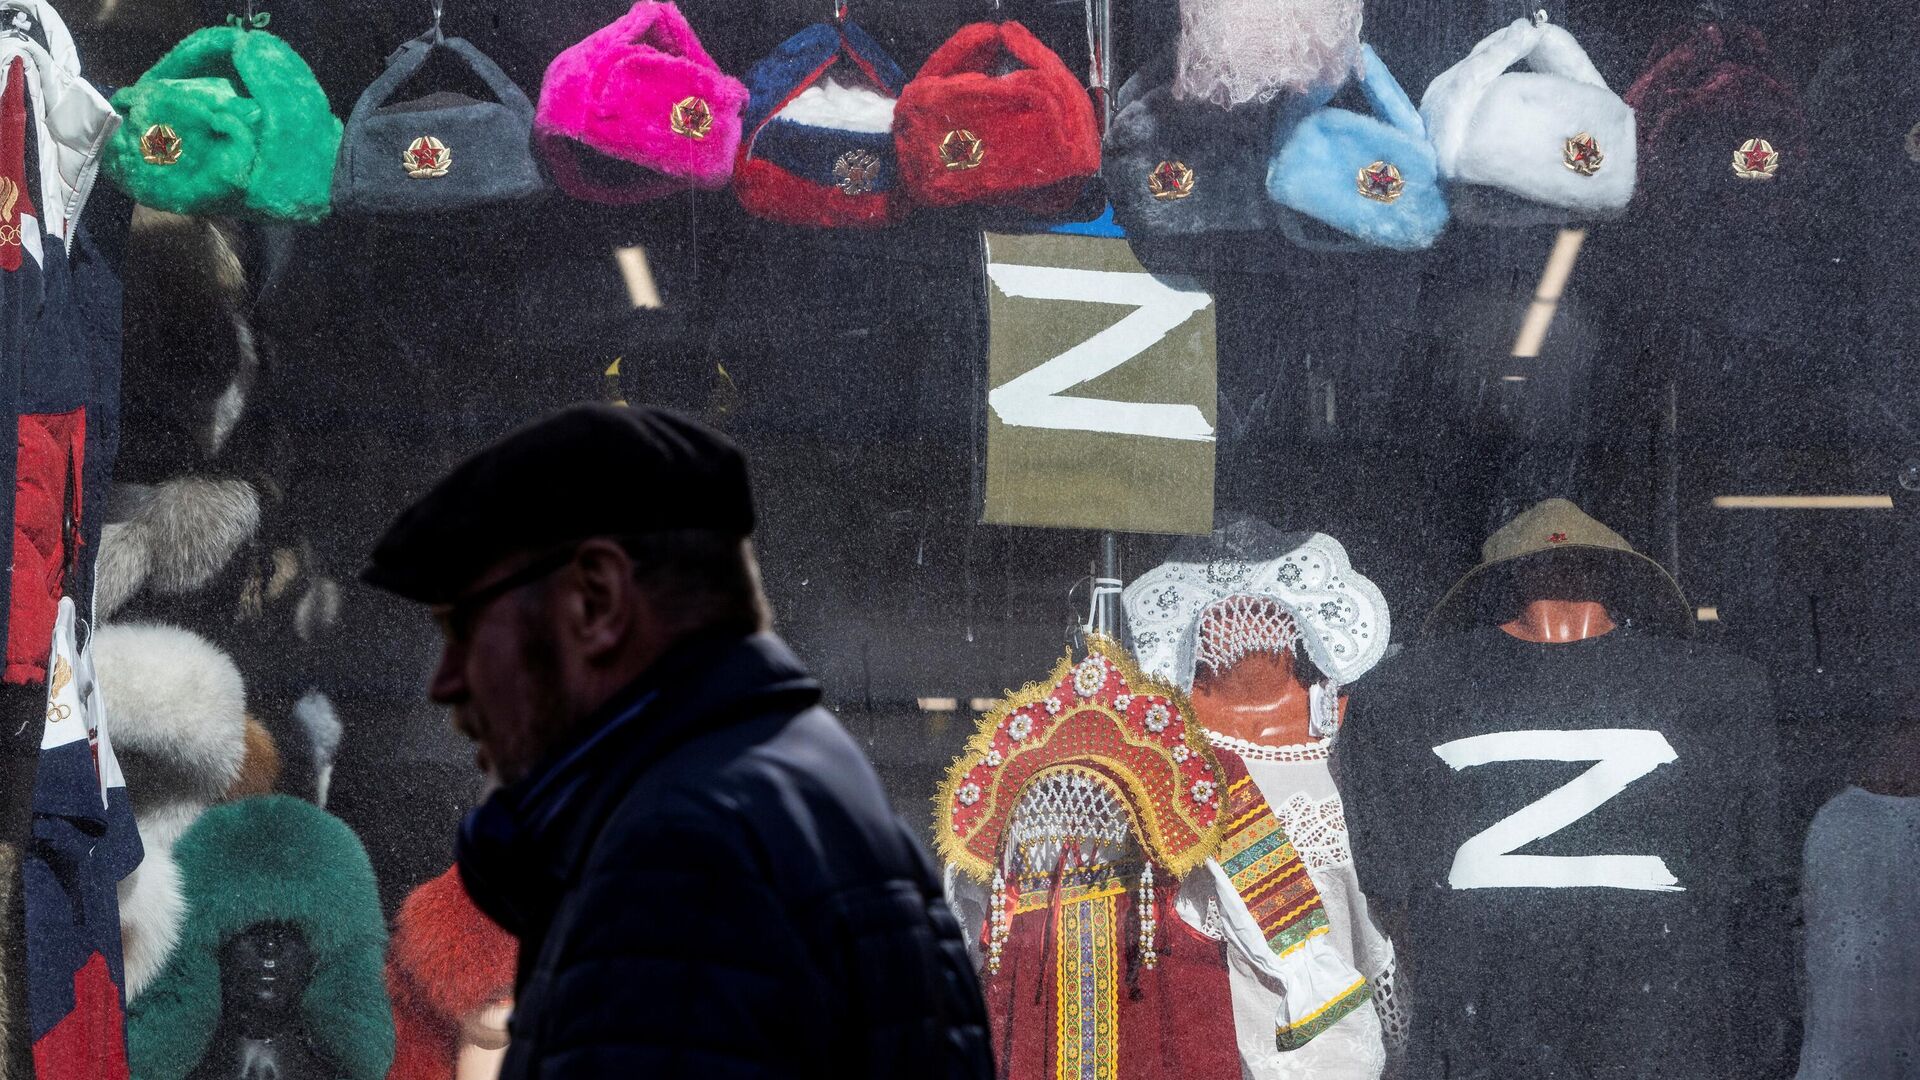 A man walks past a souvenir shop with t-shirts with symbol Z on display, in central Moscow, Russia March 23, 2022 - Sputnik International, 1920, 28.03.2022